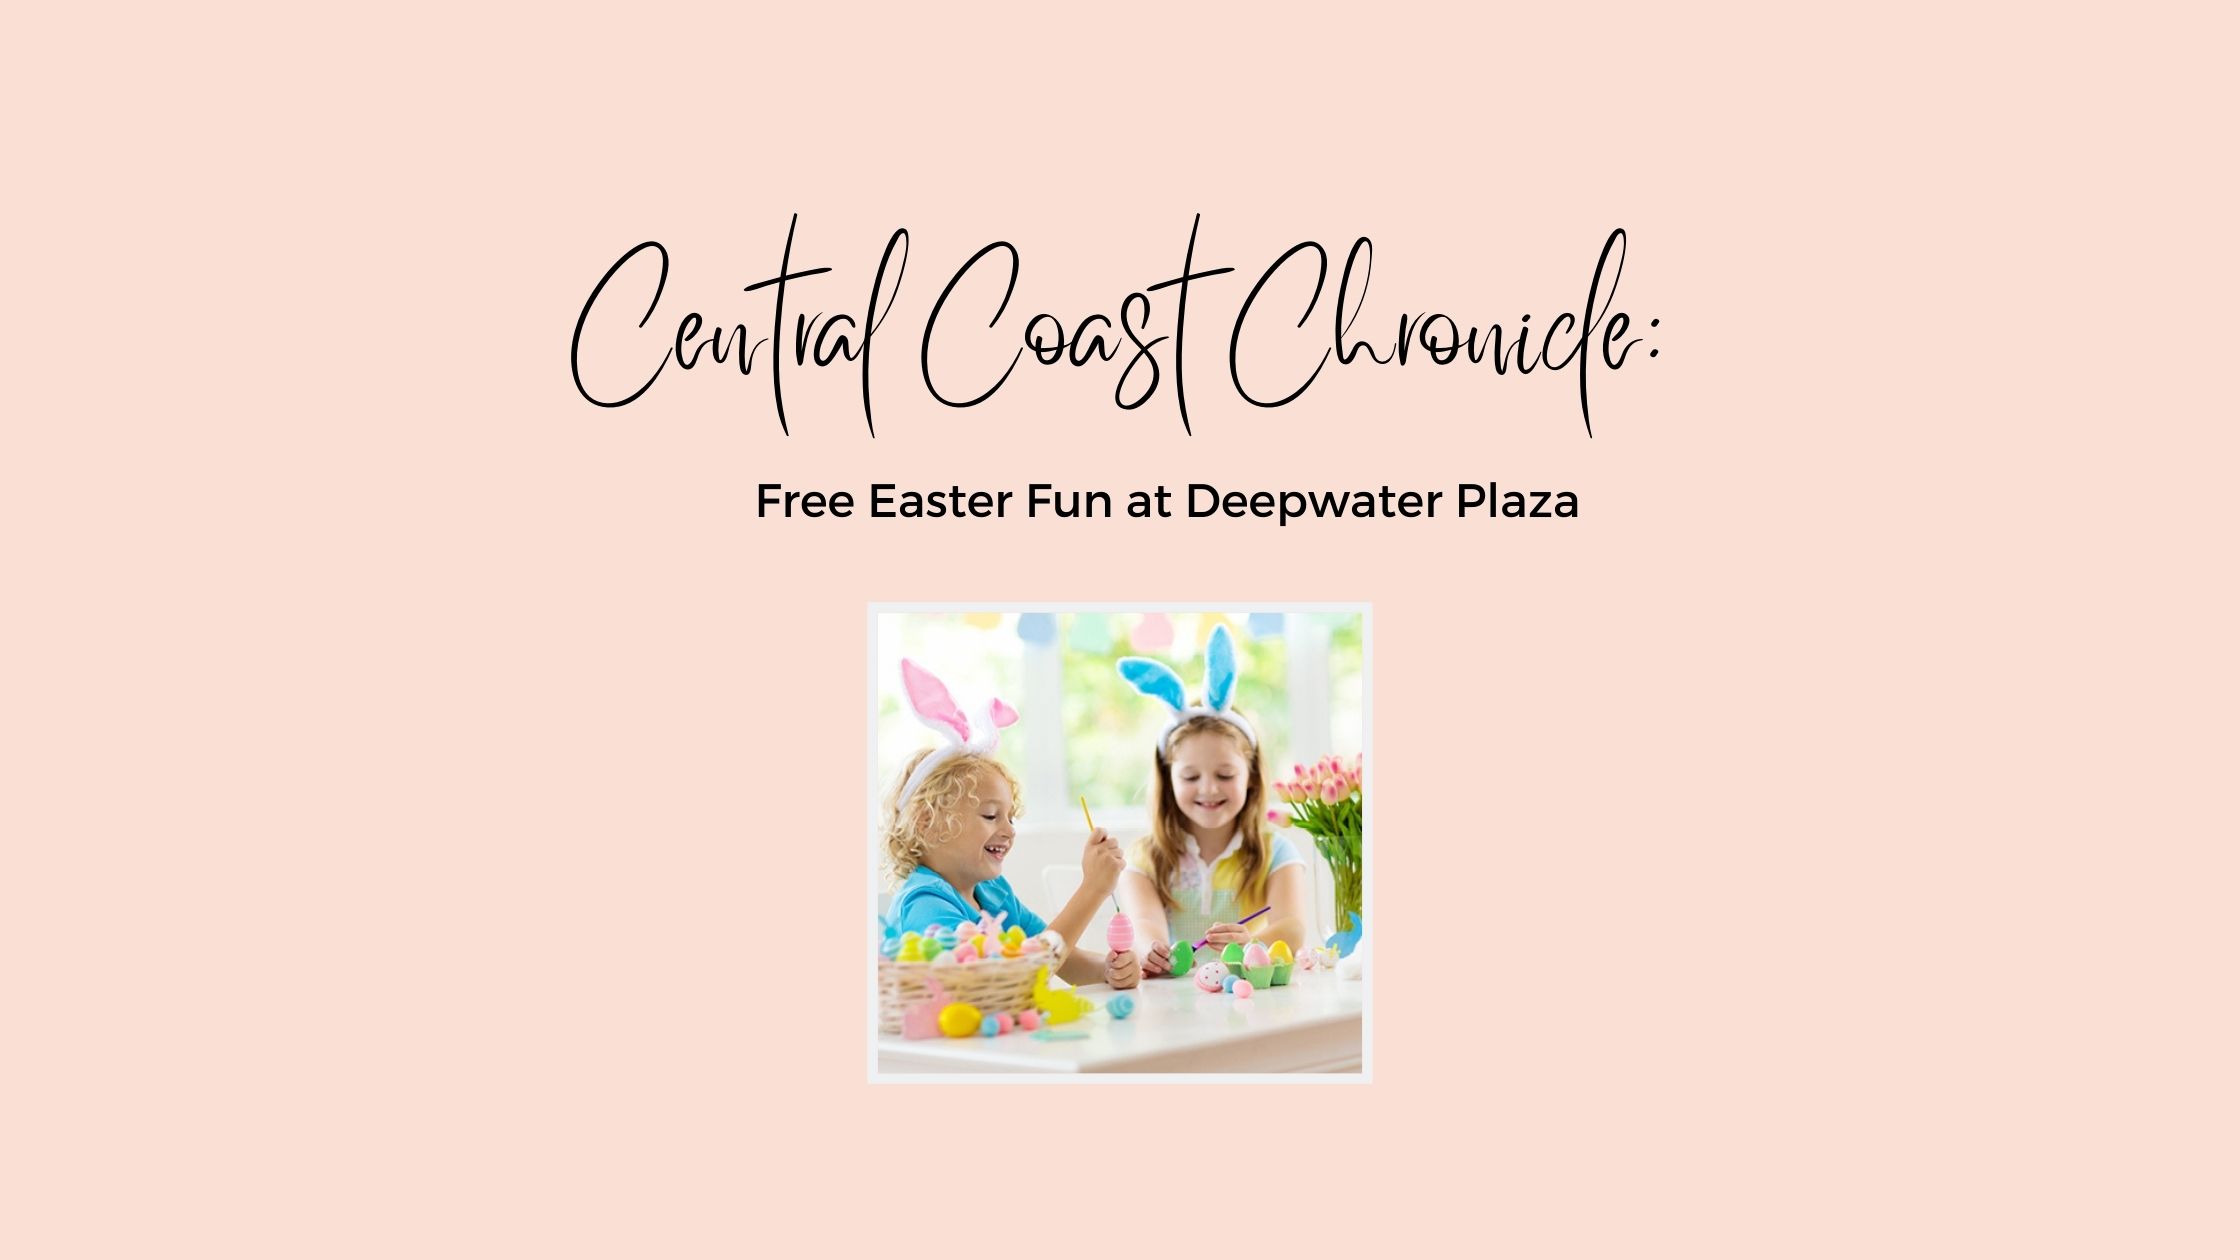 Free Easter Fun at Deepwater Plaza IMAGE FEATURES TWO CHILDREN IN BUNNY EARS CREATING EASTER CRAFT ITEMS